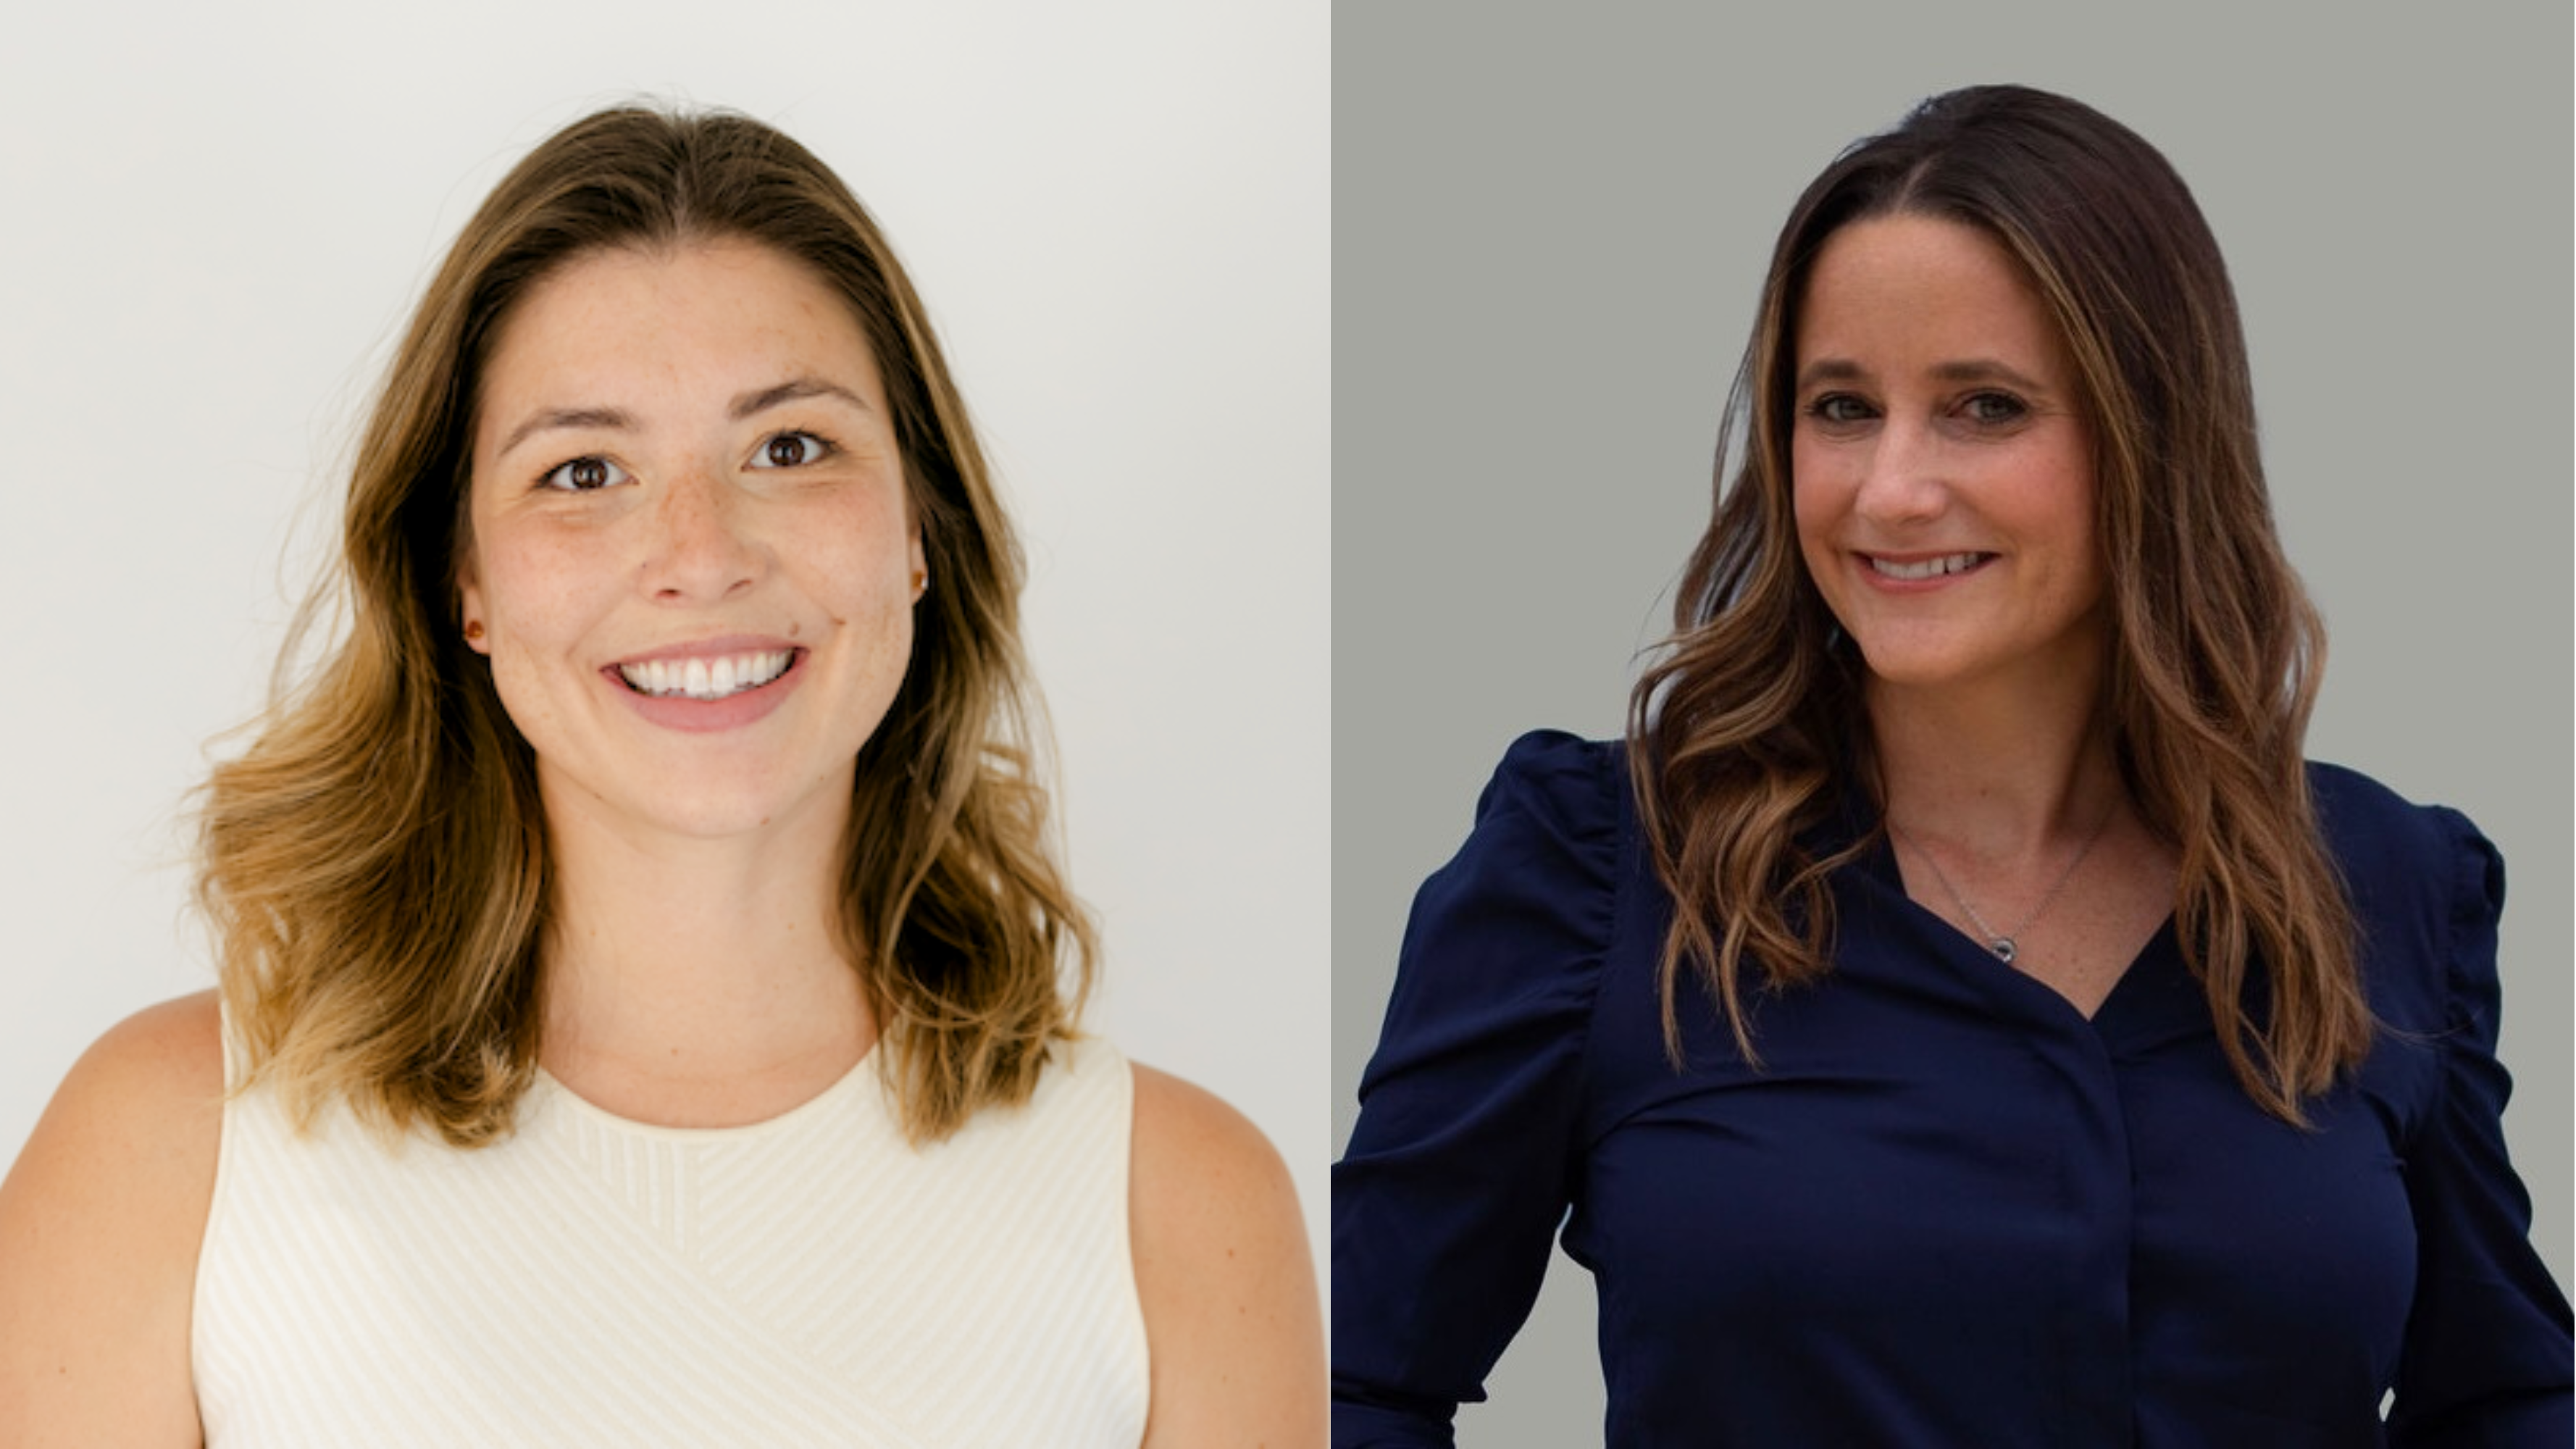 Christi Sodano and Kim Gallagher, new executives at Clevertech